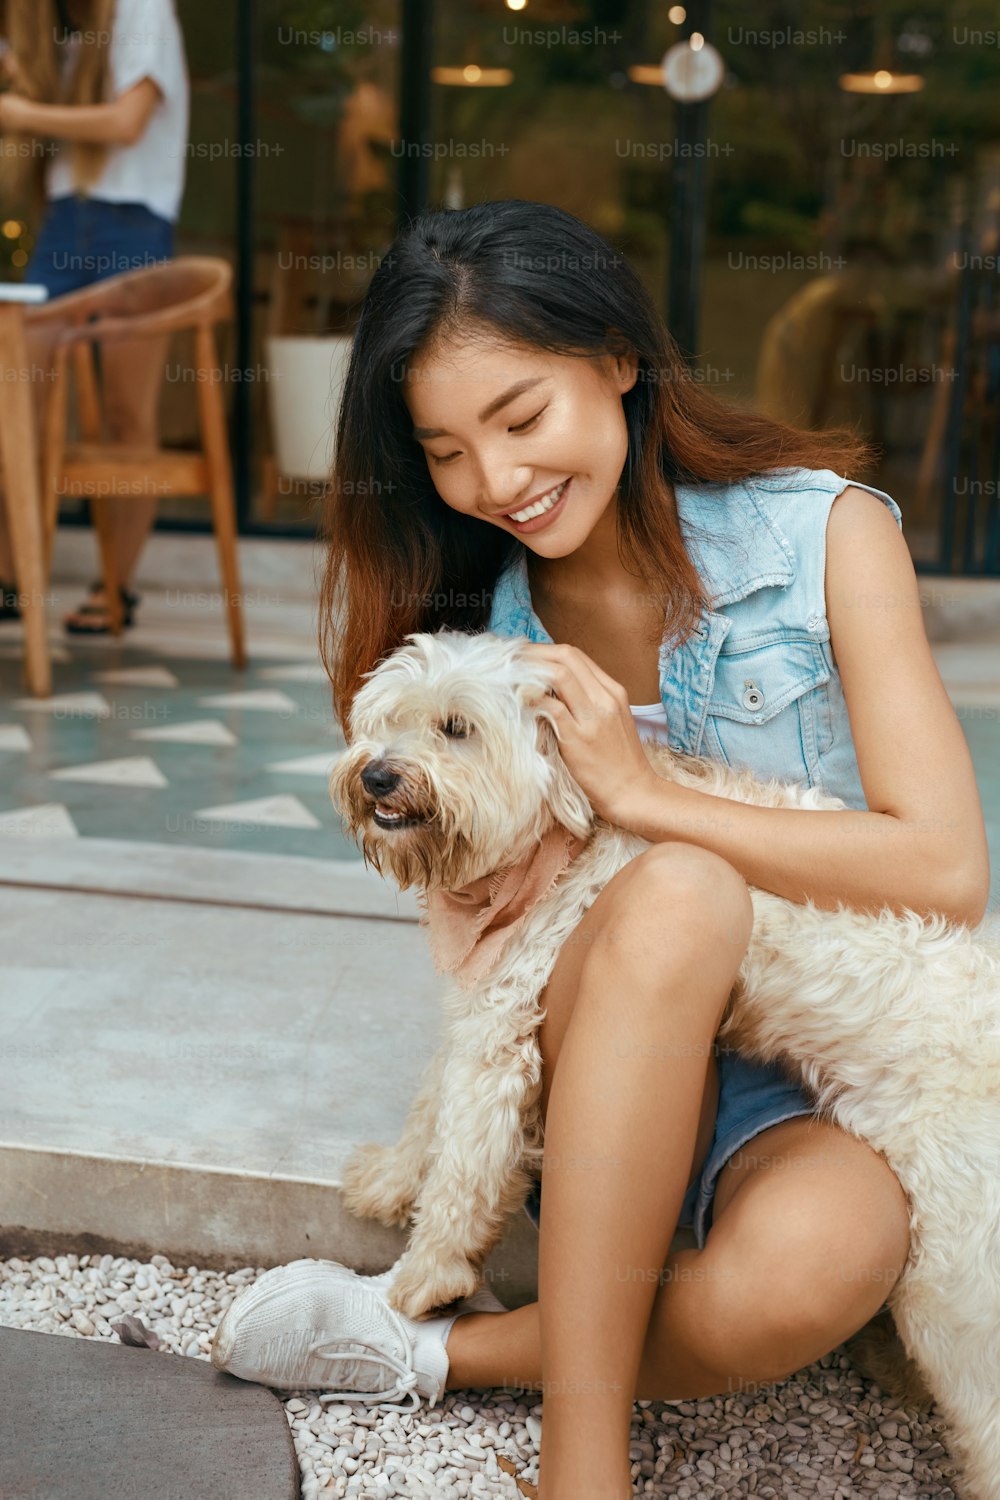 Beautifull Garl And Dog Xxxx Video - 500+ Girl With Dog Pictures [HD] | Download Free Images on Unsplash